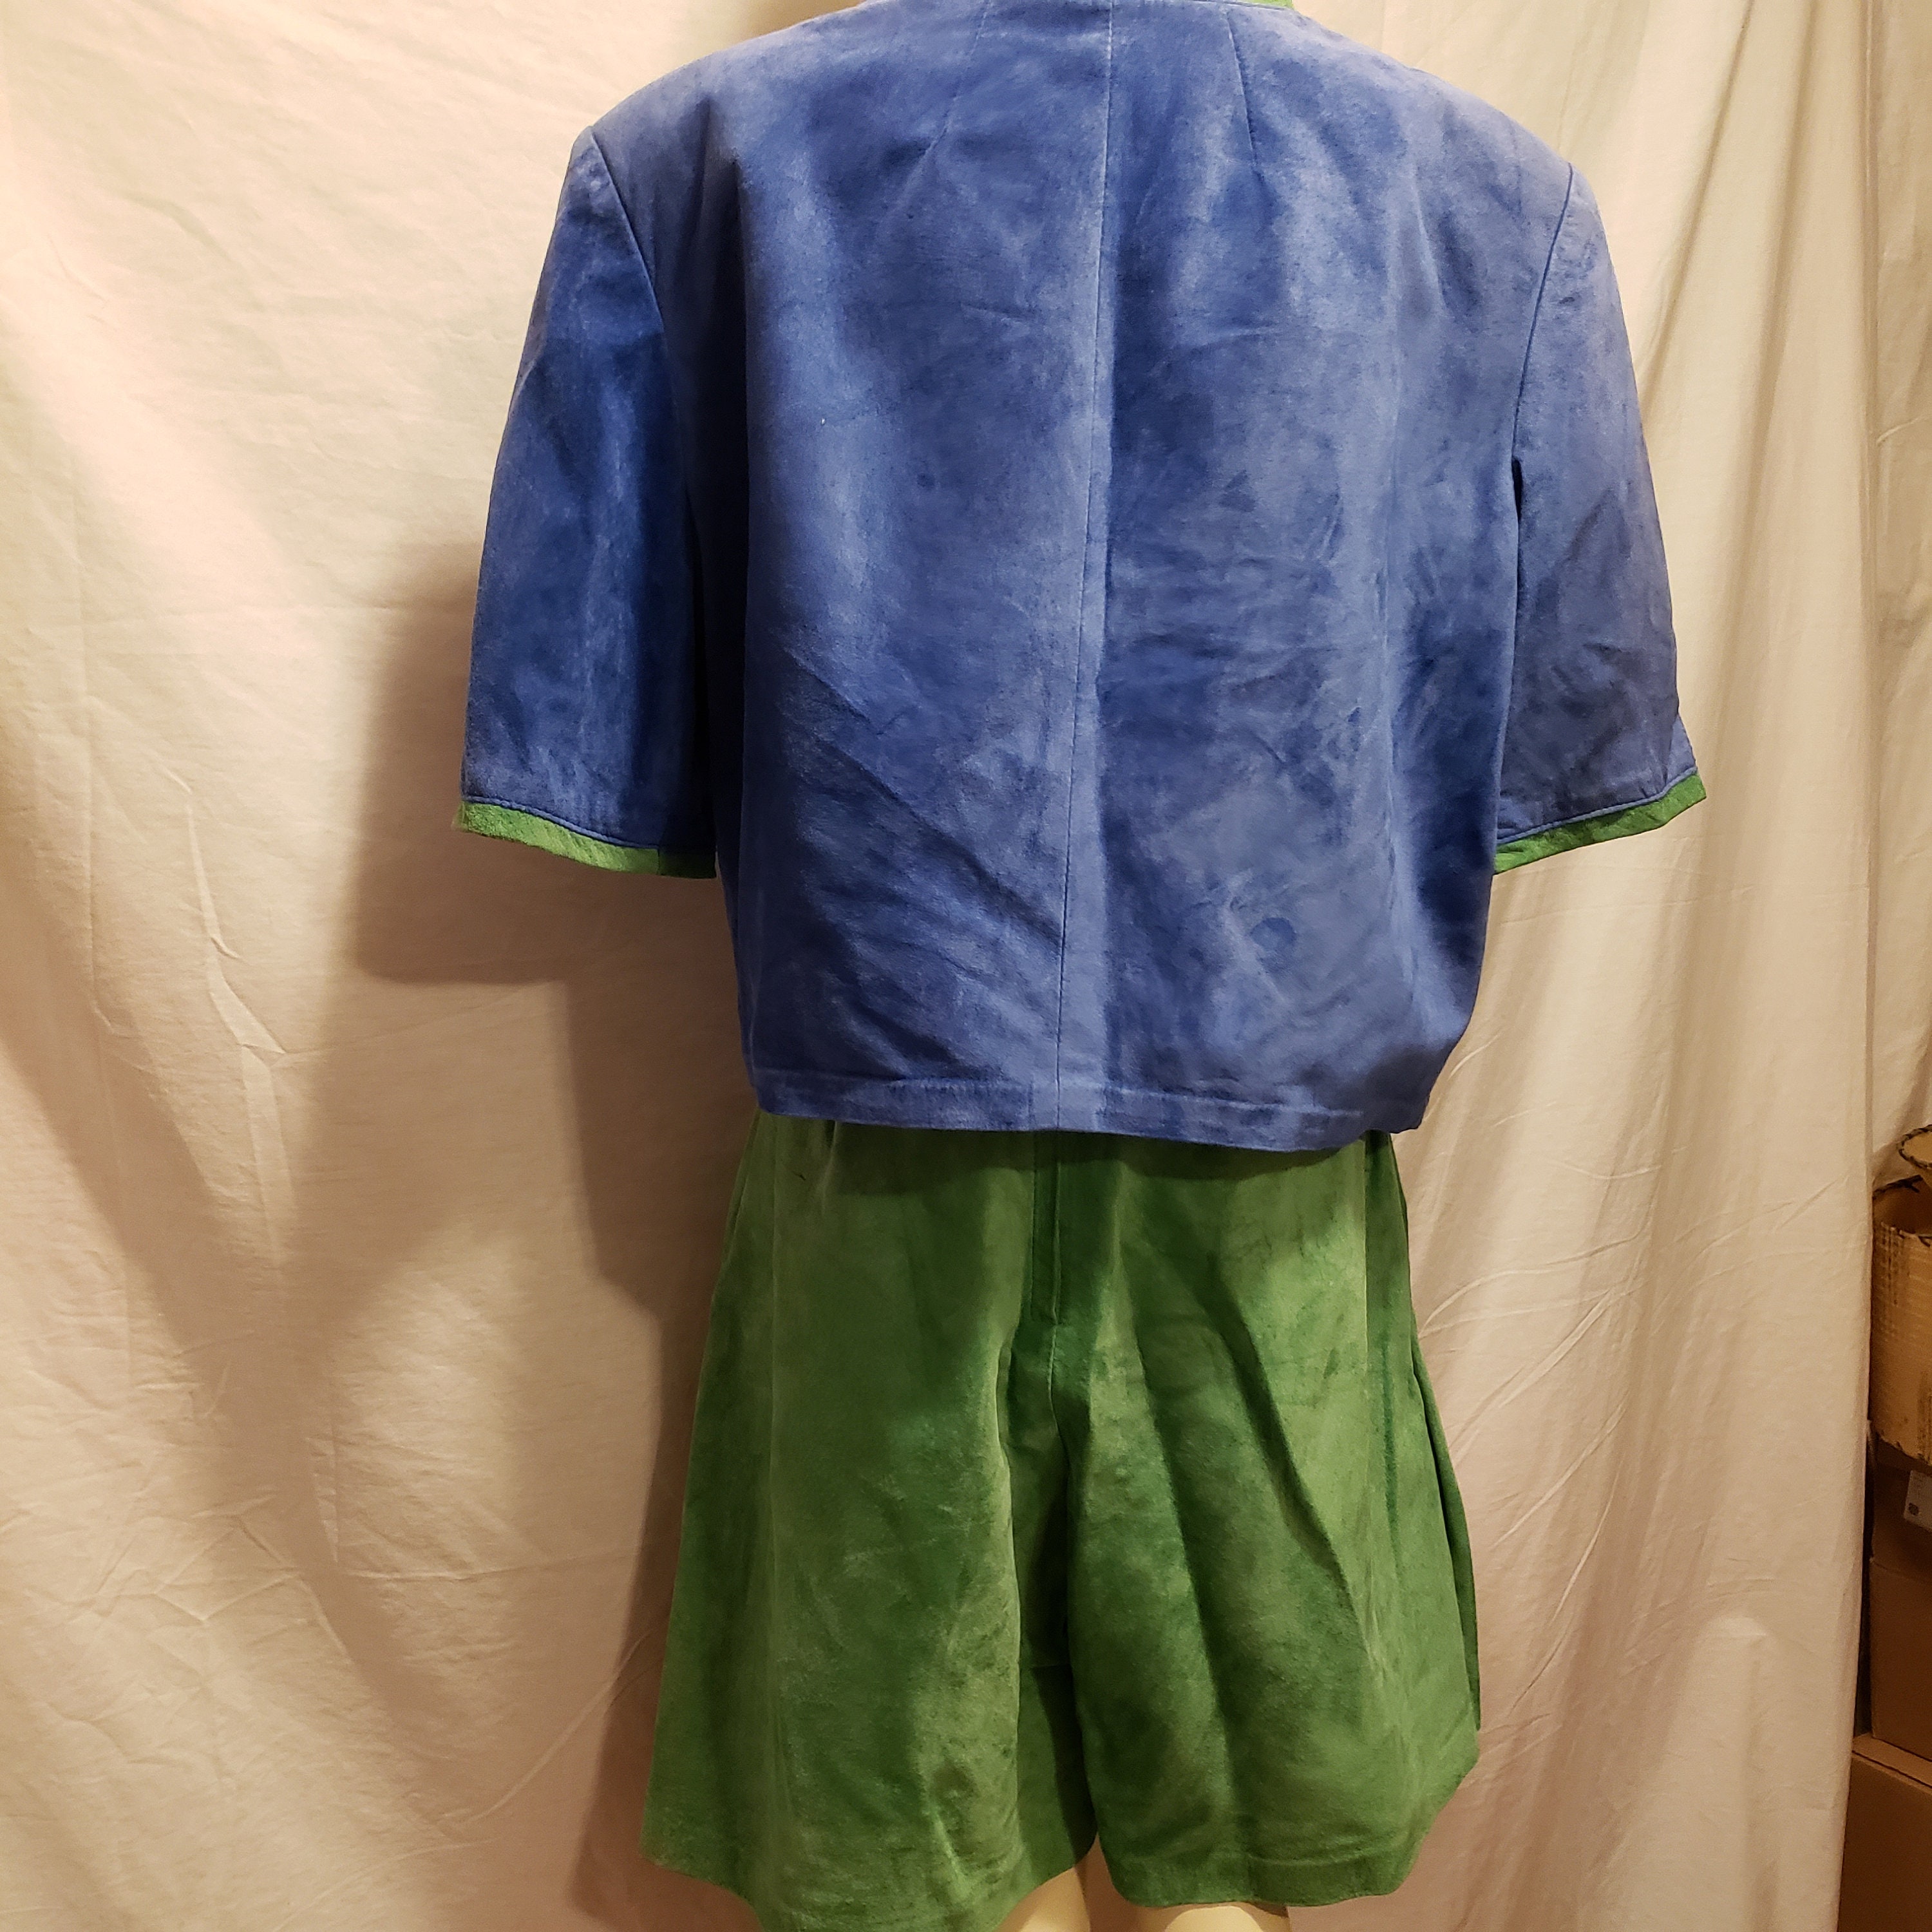 1980s green suede skirt and blue with green trim one button short sleeved blazer made by Daniel Leather